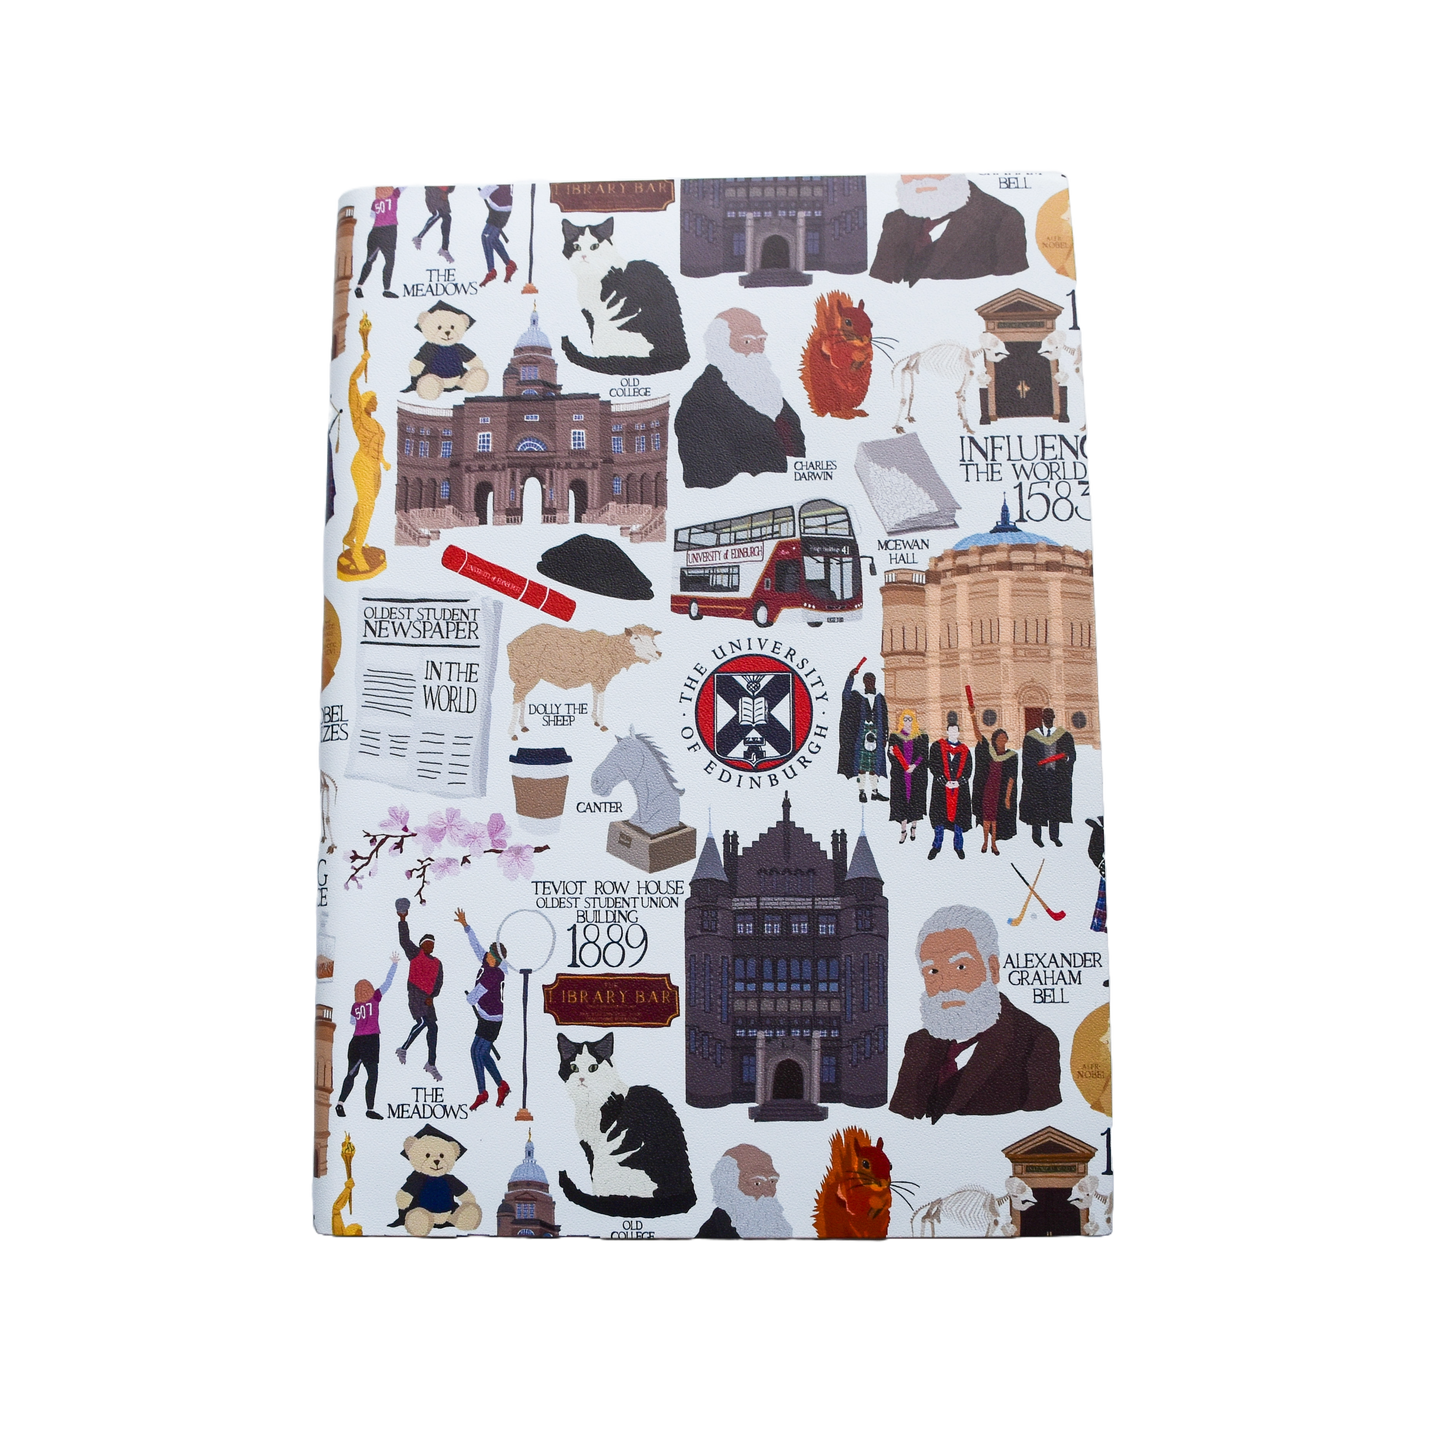 A close up of the A5 Heritage Collection notebook. It is white with various illustrated figures and images associated with the University of Edinburgh.